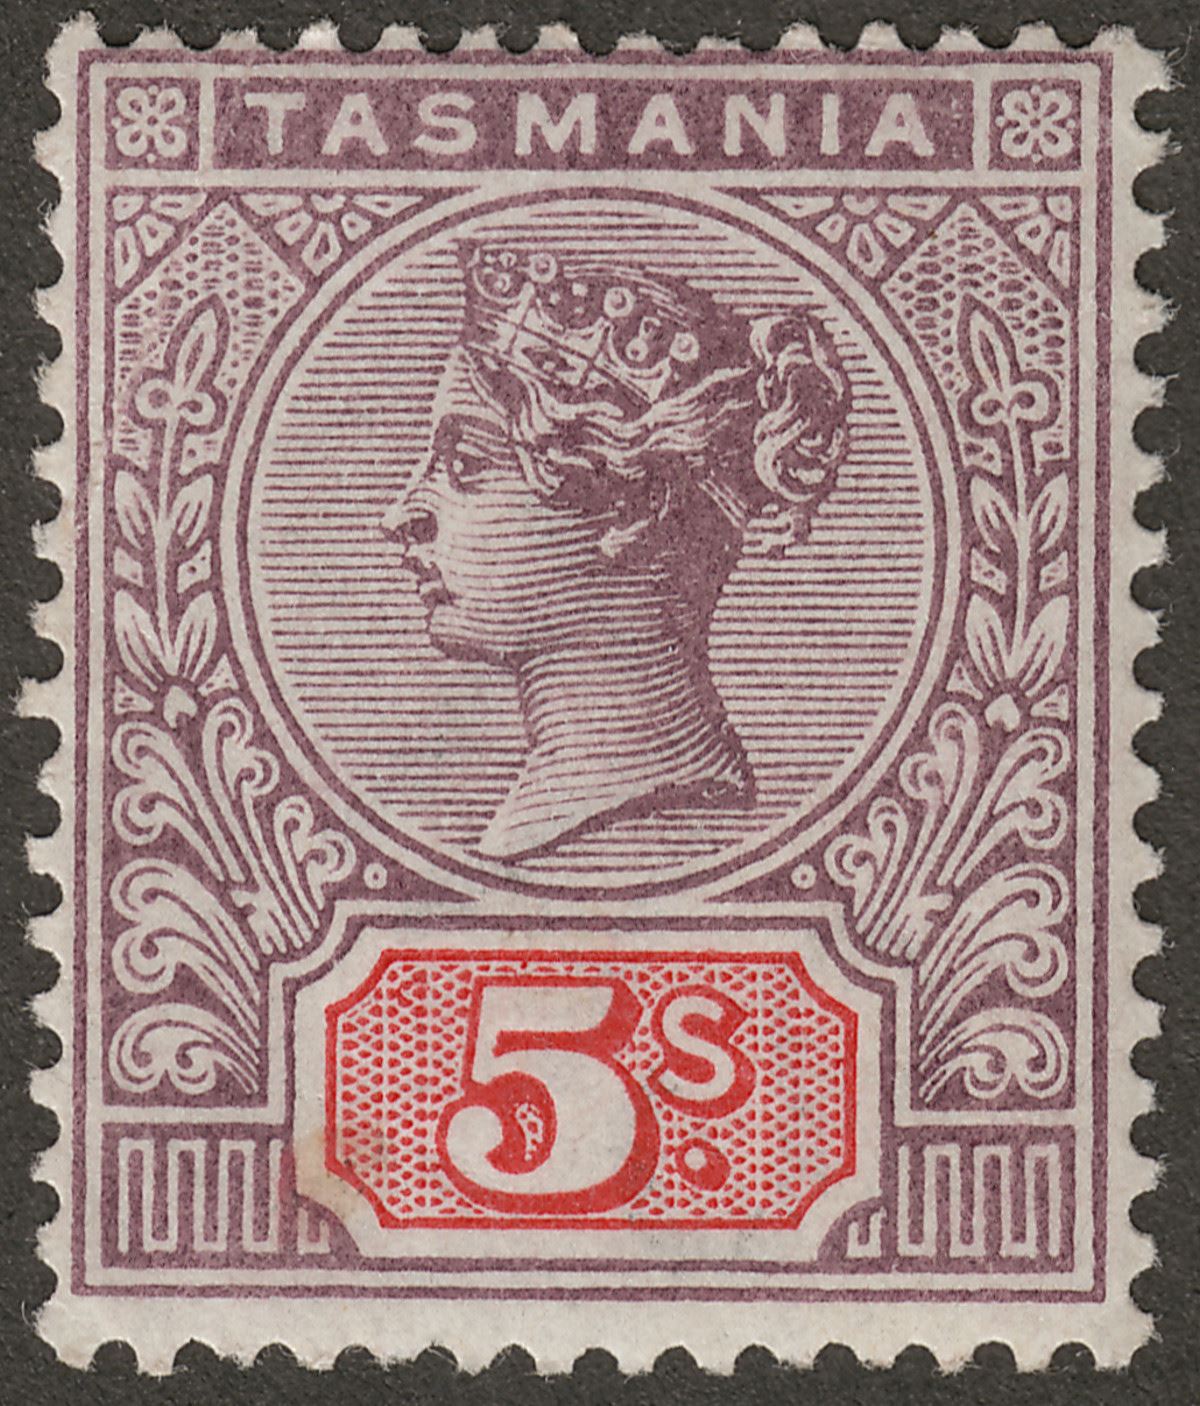 Tasmania 1897 Queen Victoria 5sh Lilac and Red Mint SG223 cat £90 crease